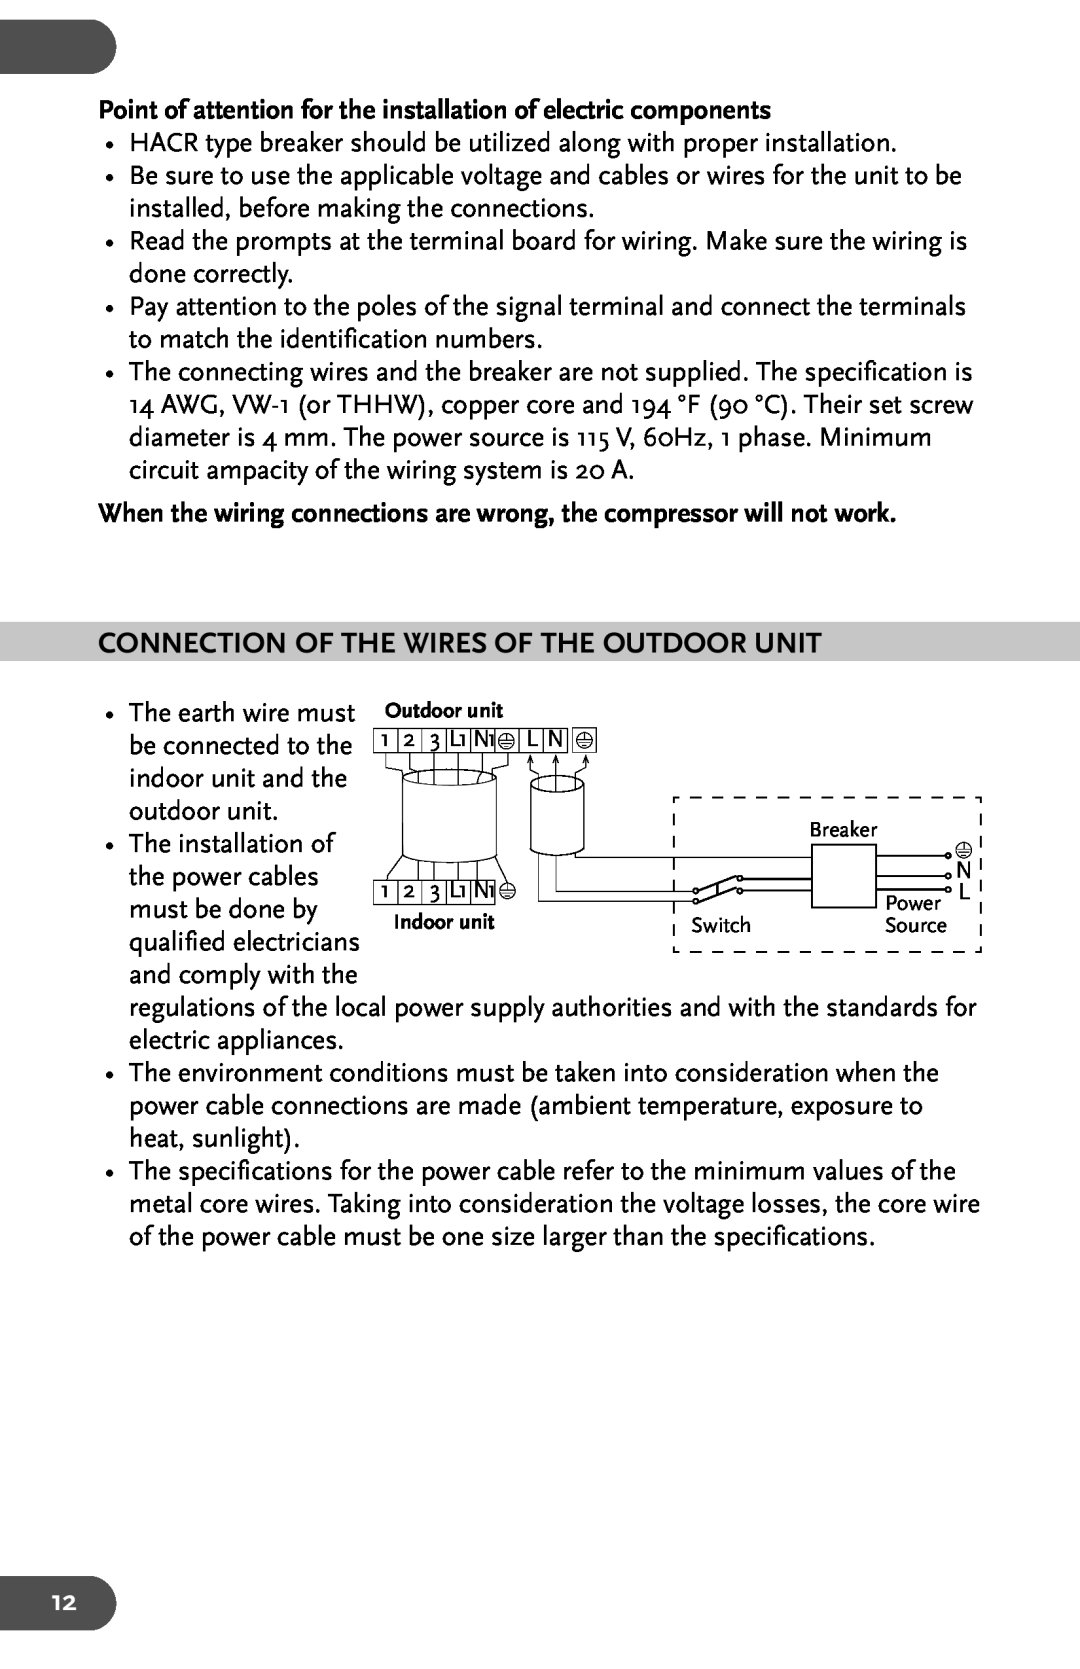 Amcor AHW 162 user manual Connection Of The Wires Of The Outdoor Unit 